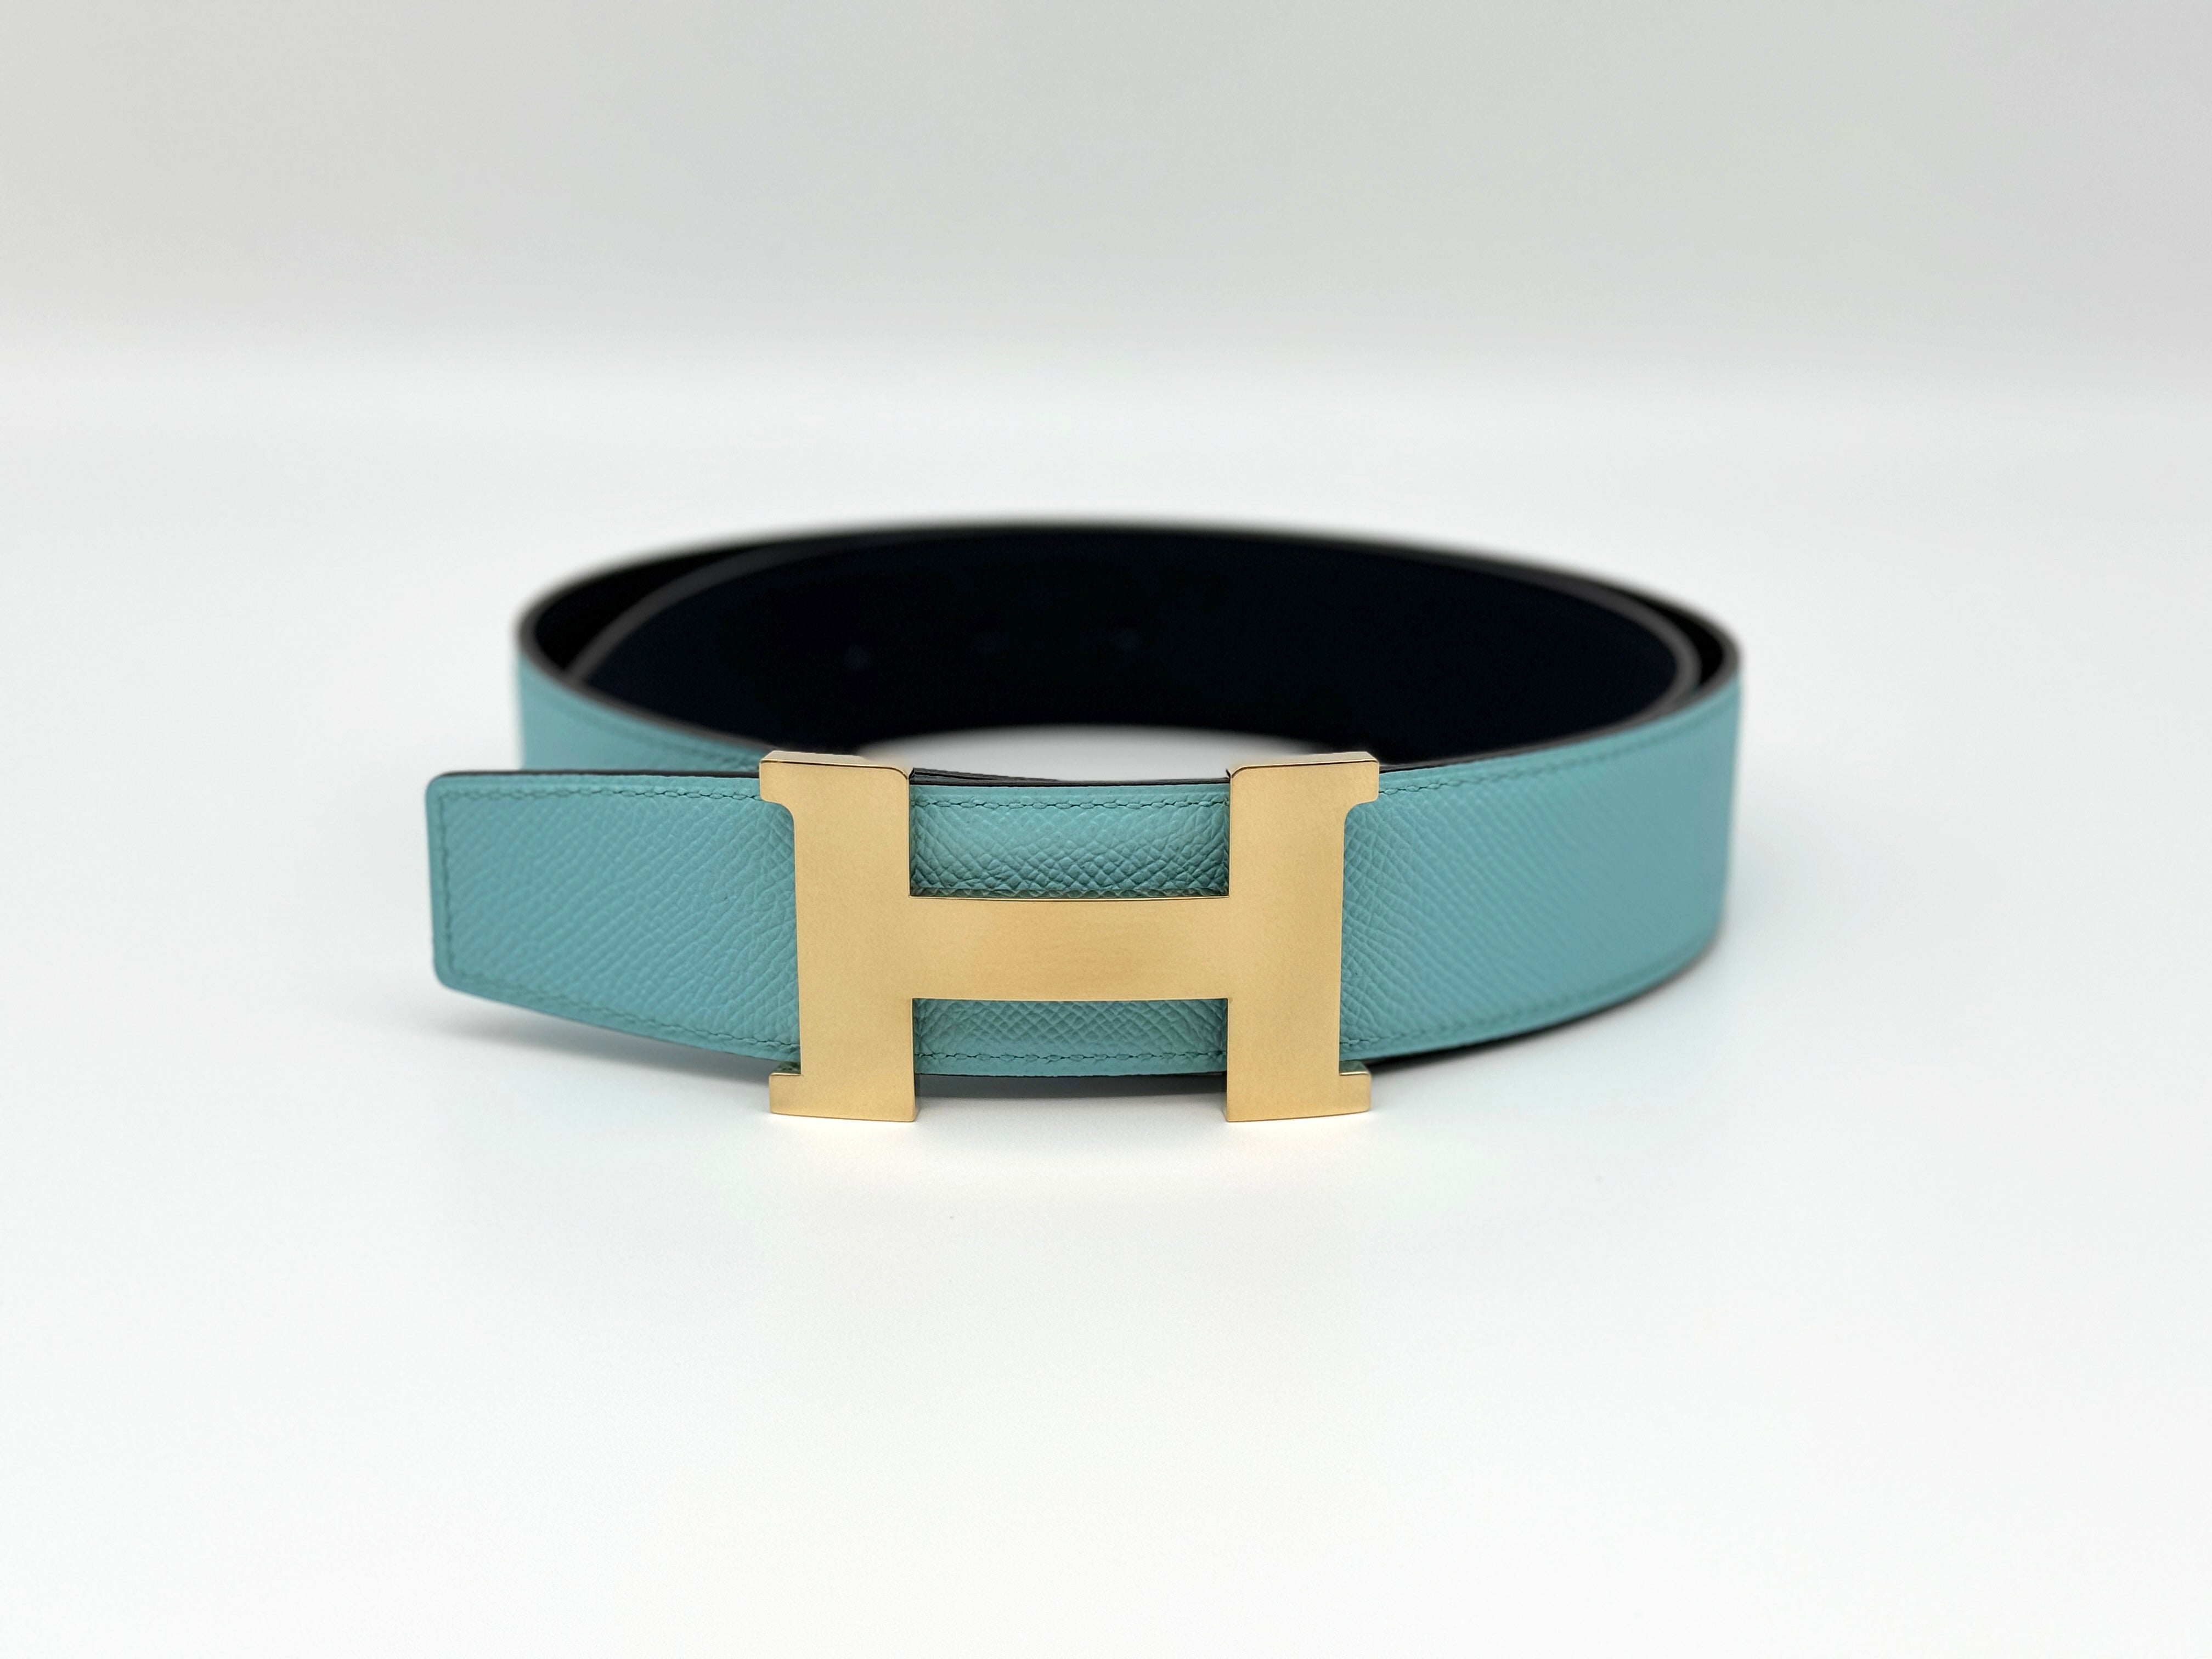 Hermès 38mm Reversible Belt with Permabrass Constance Buckle